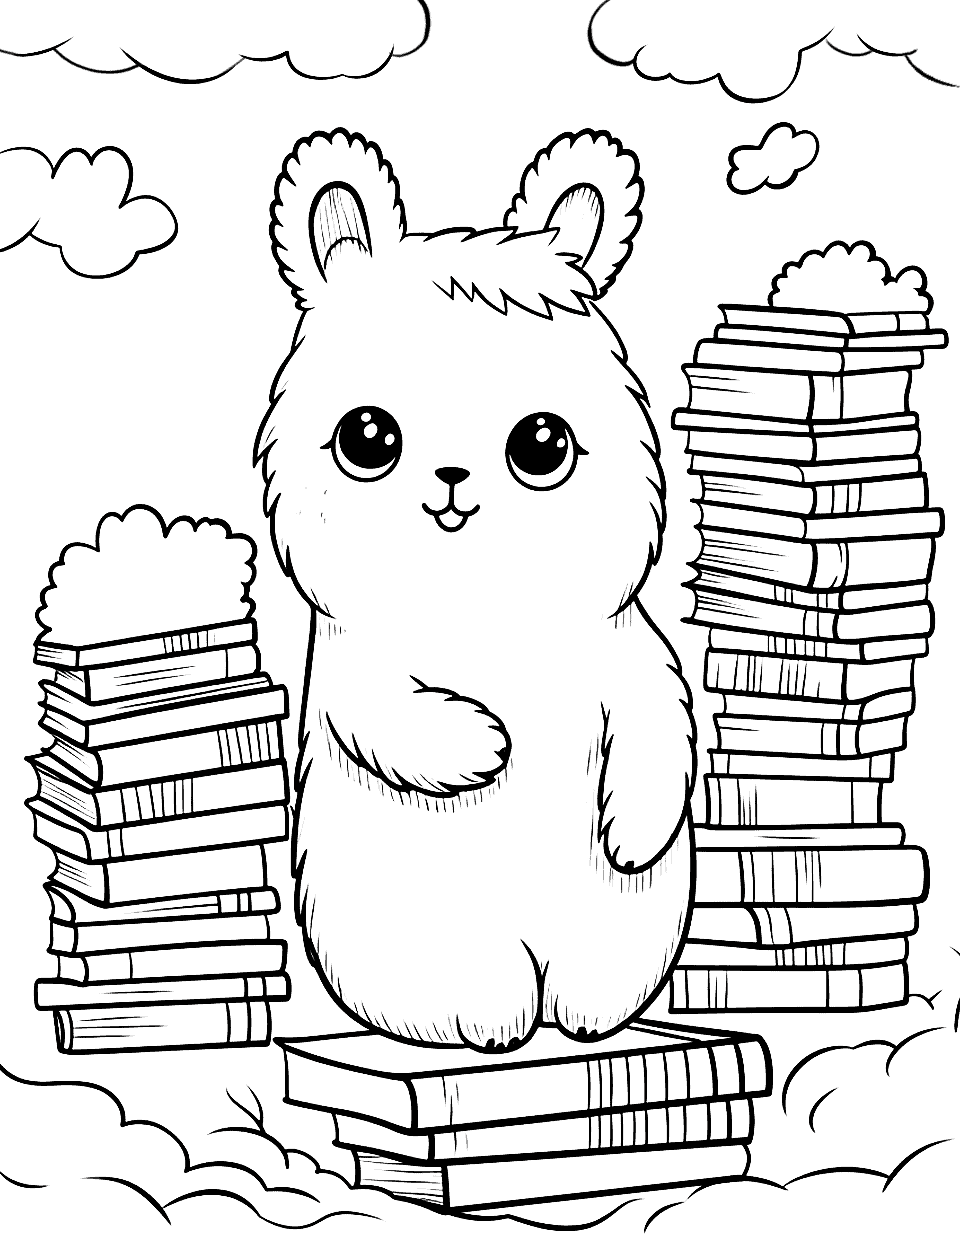 Llama's Lovely Library Day Kawaii Coloring Page - A Kawaii llama spending a peaceful day in the library.